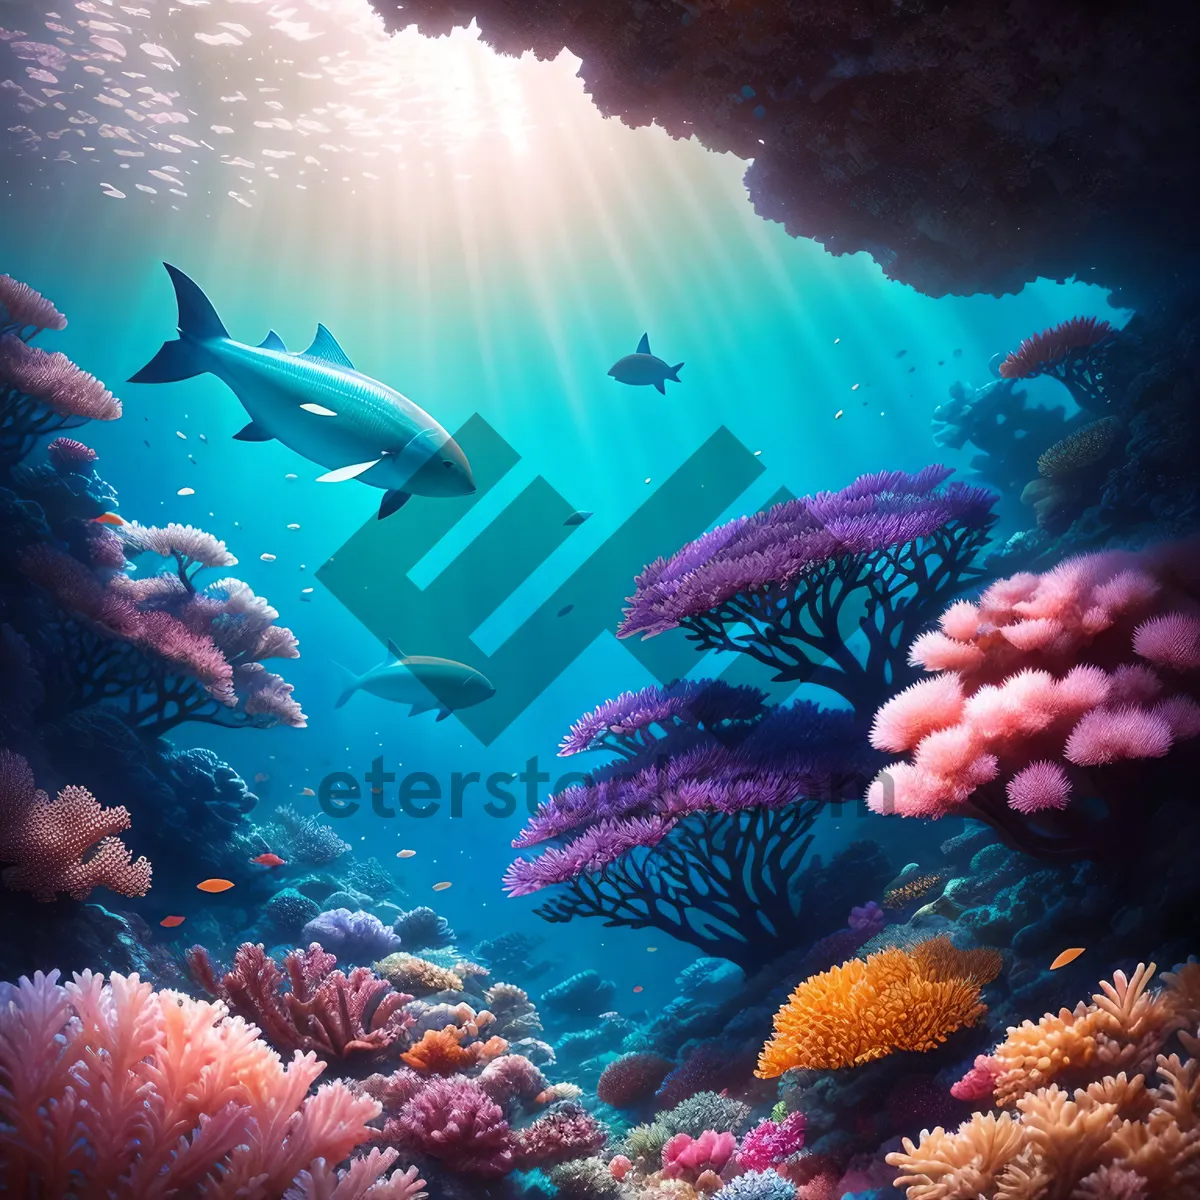 Picture of Vibrant Life beneath the Sunlit Coral Reef.